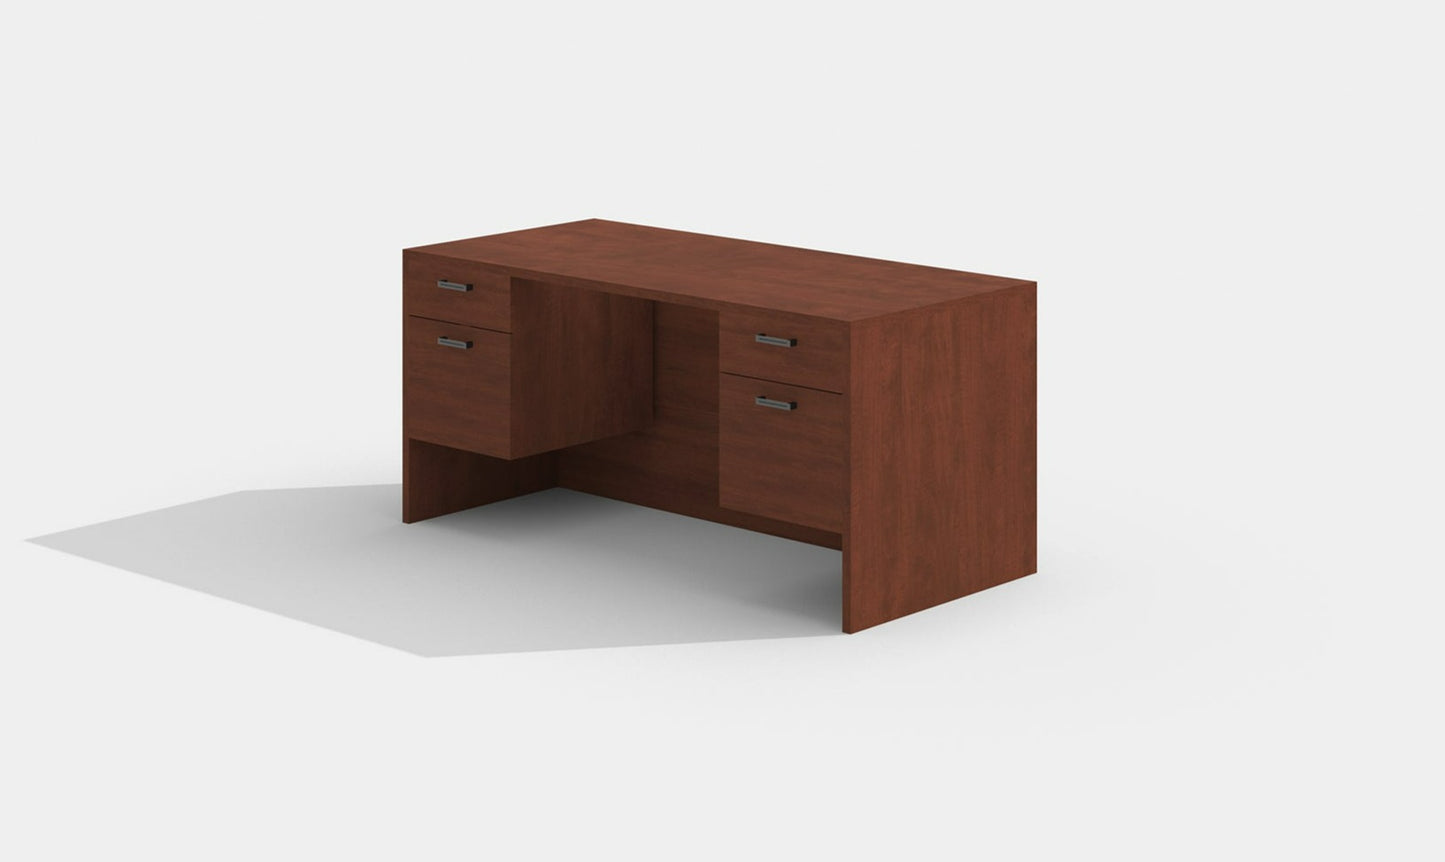 Load image into Gallery viewer, Amber Executive Office Desk w/ Double Suspended Storage by Cherryman Industries
